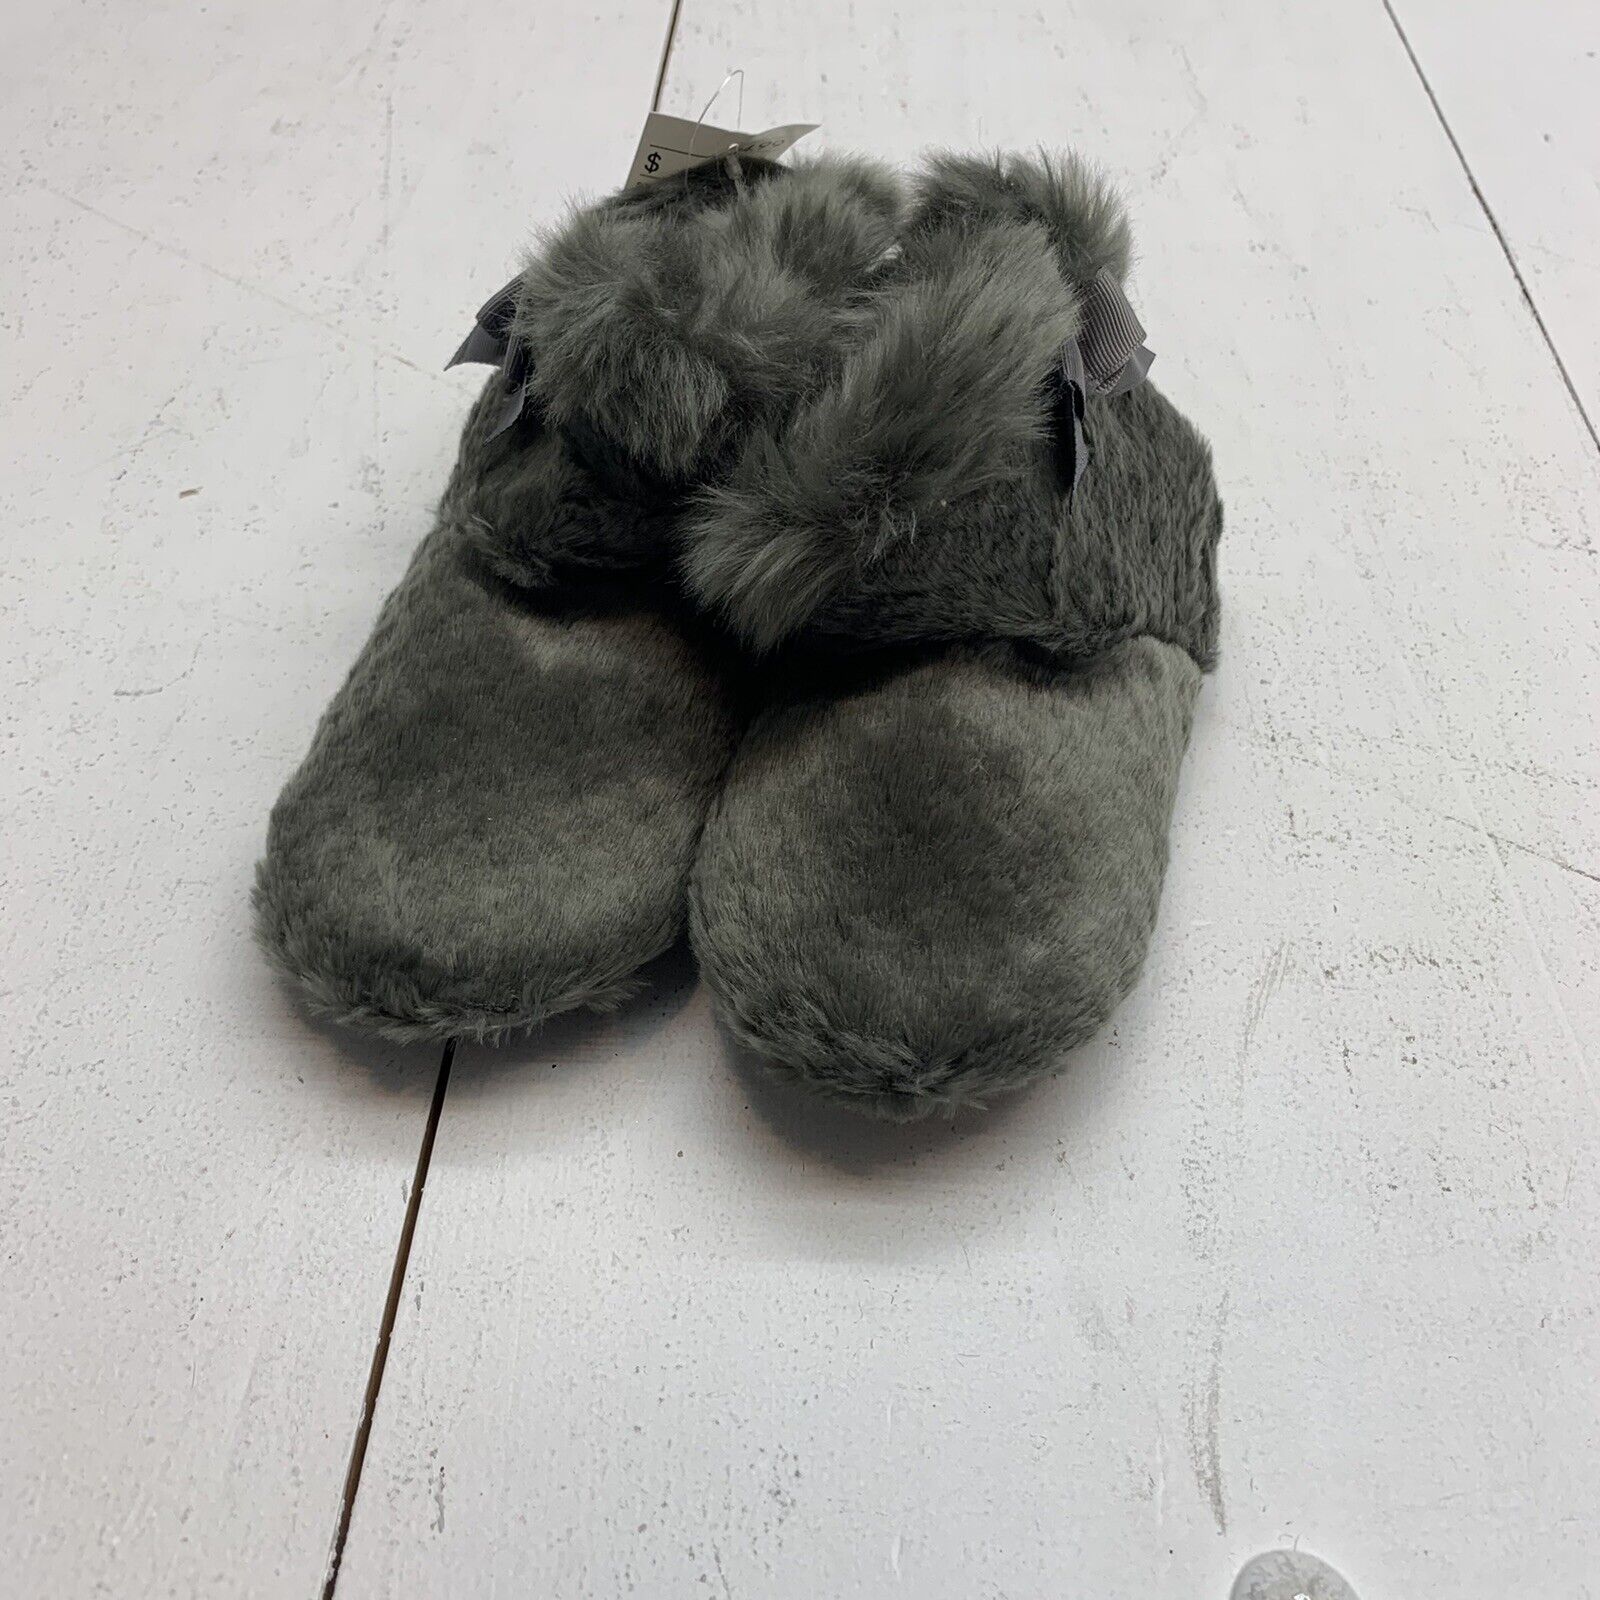 H&M Girls Fuzzy House Slippers Size 10-11.5